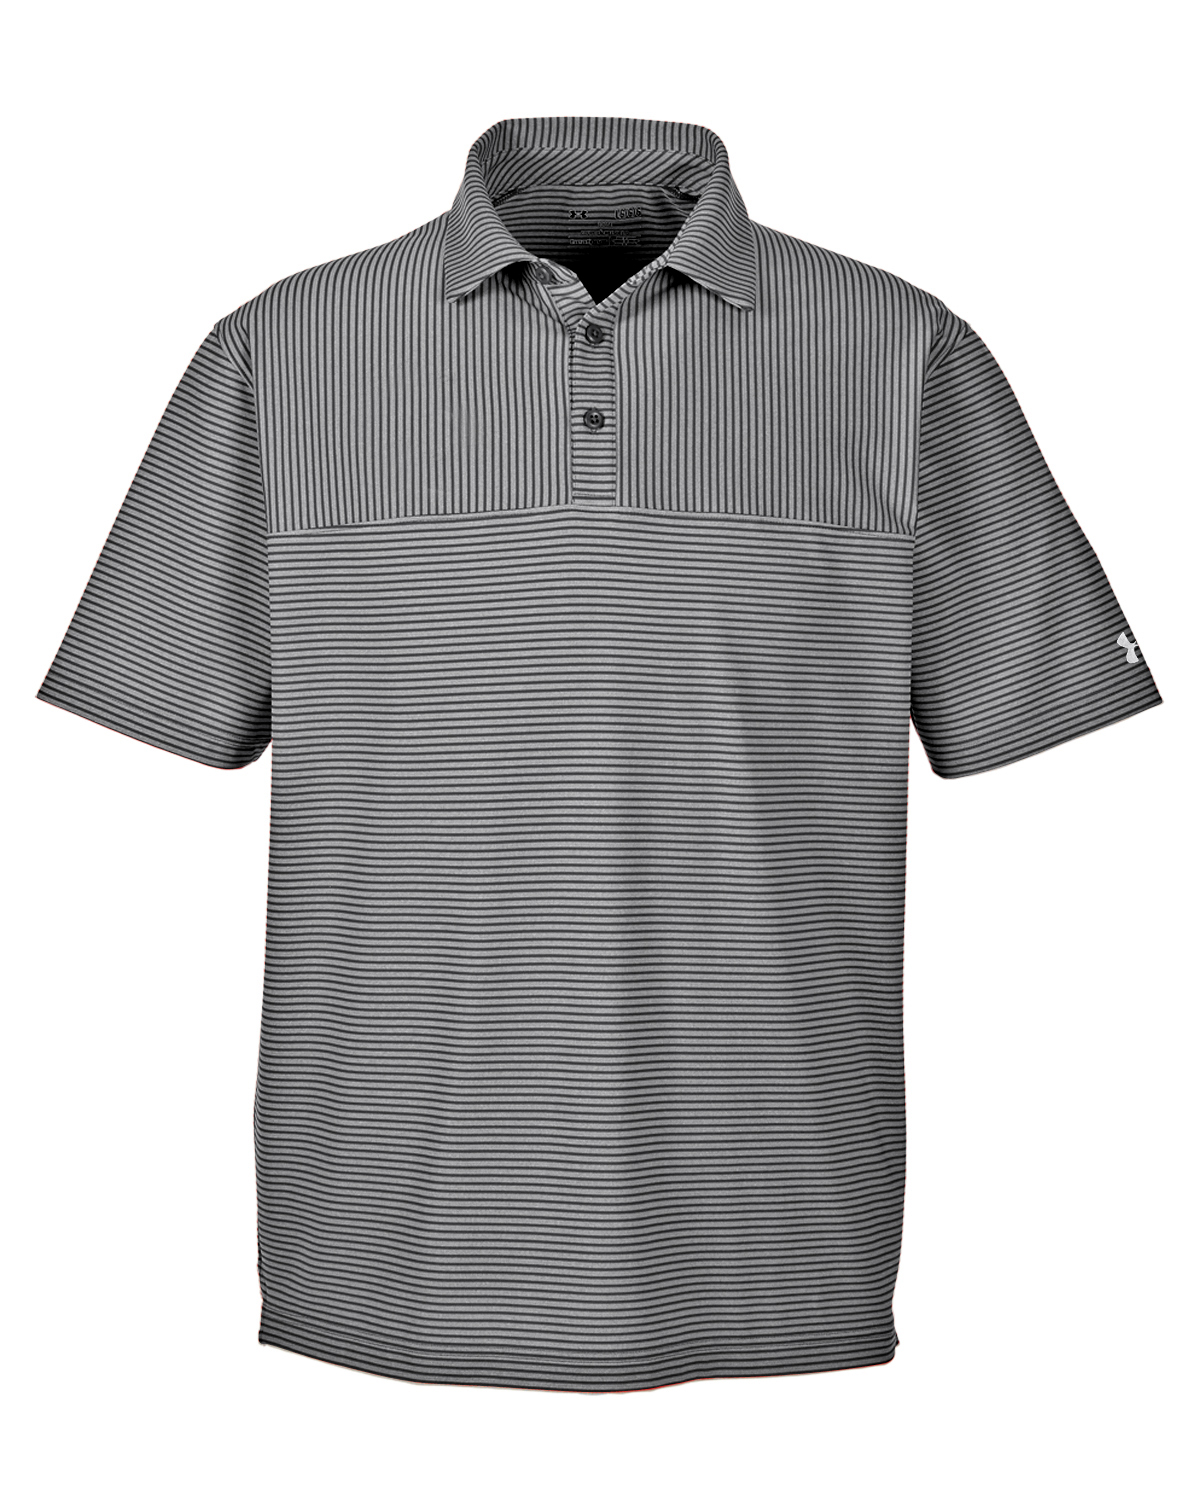 Under Armour 1283706 - Men's Playoff Polo